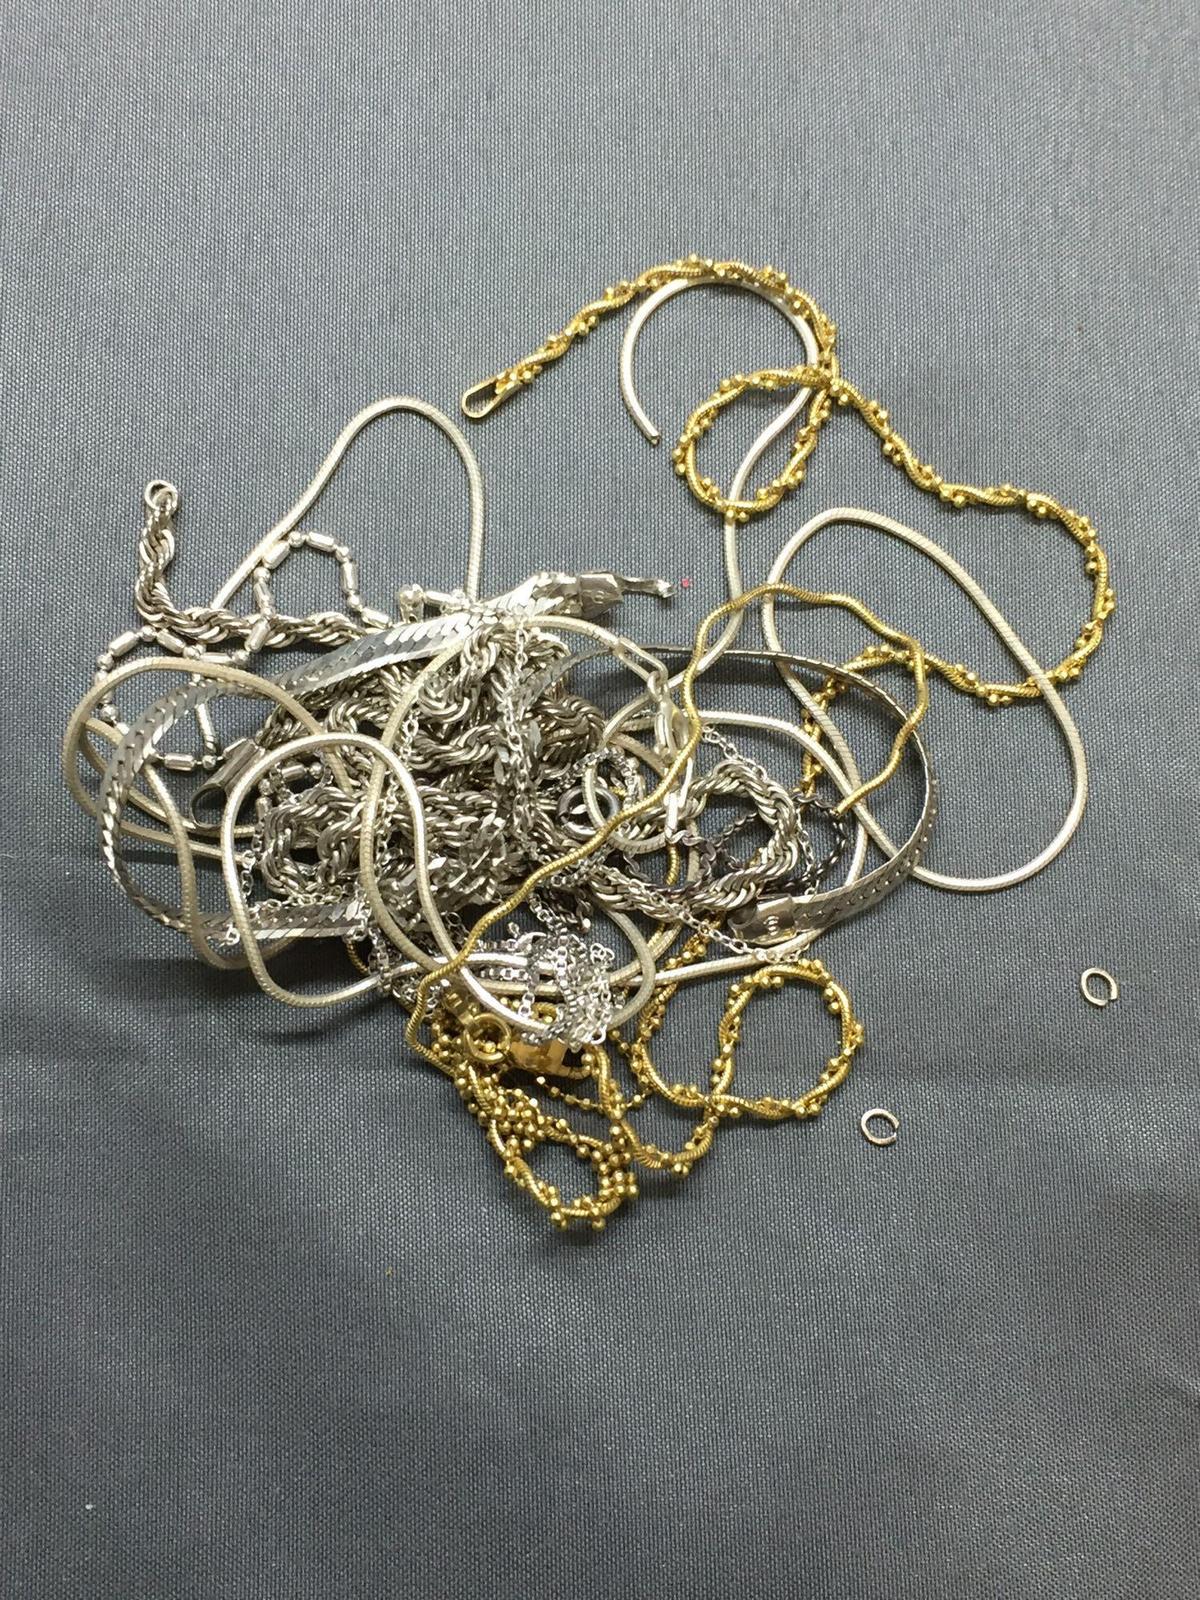 Sterling Silver Jewelry Scrap Lot Chains - 29 Grams